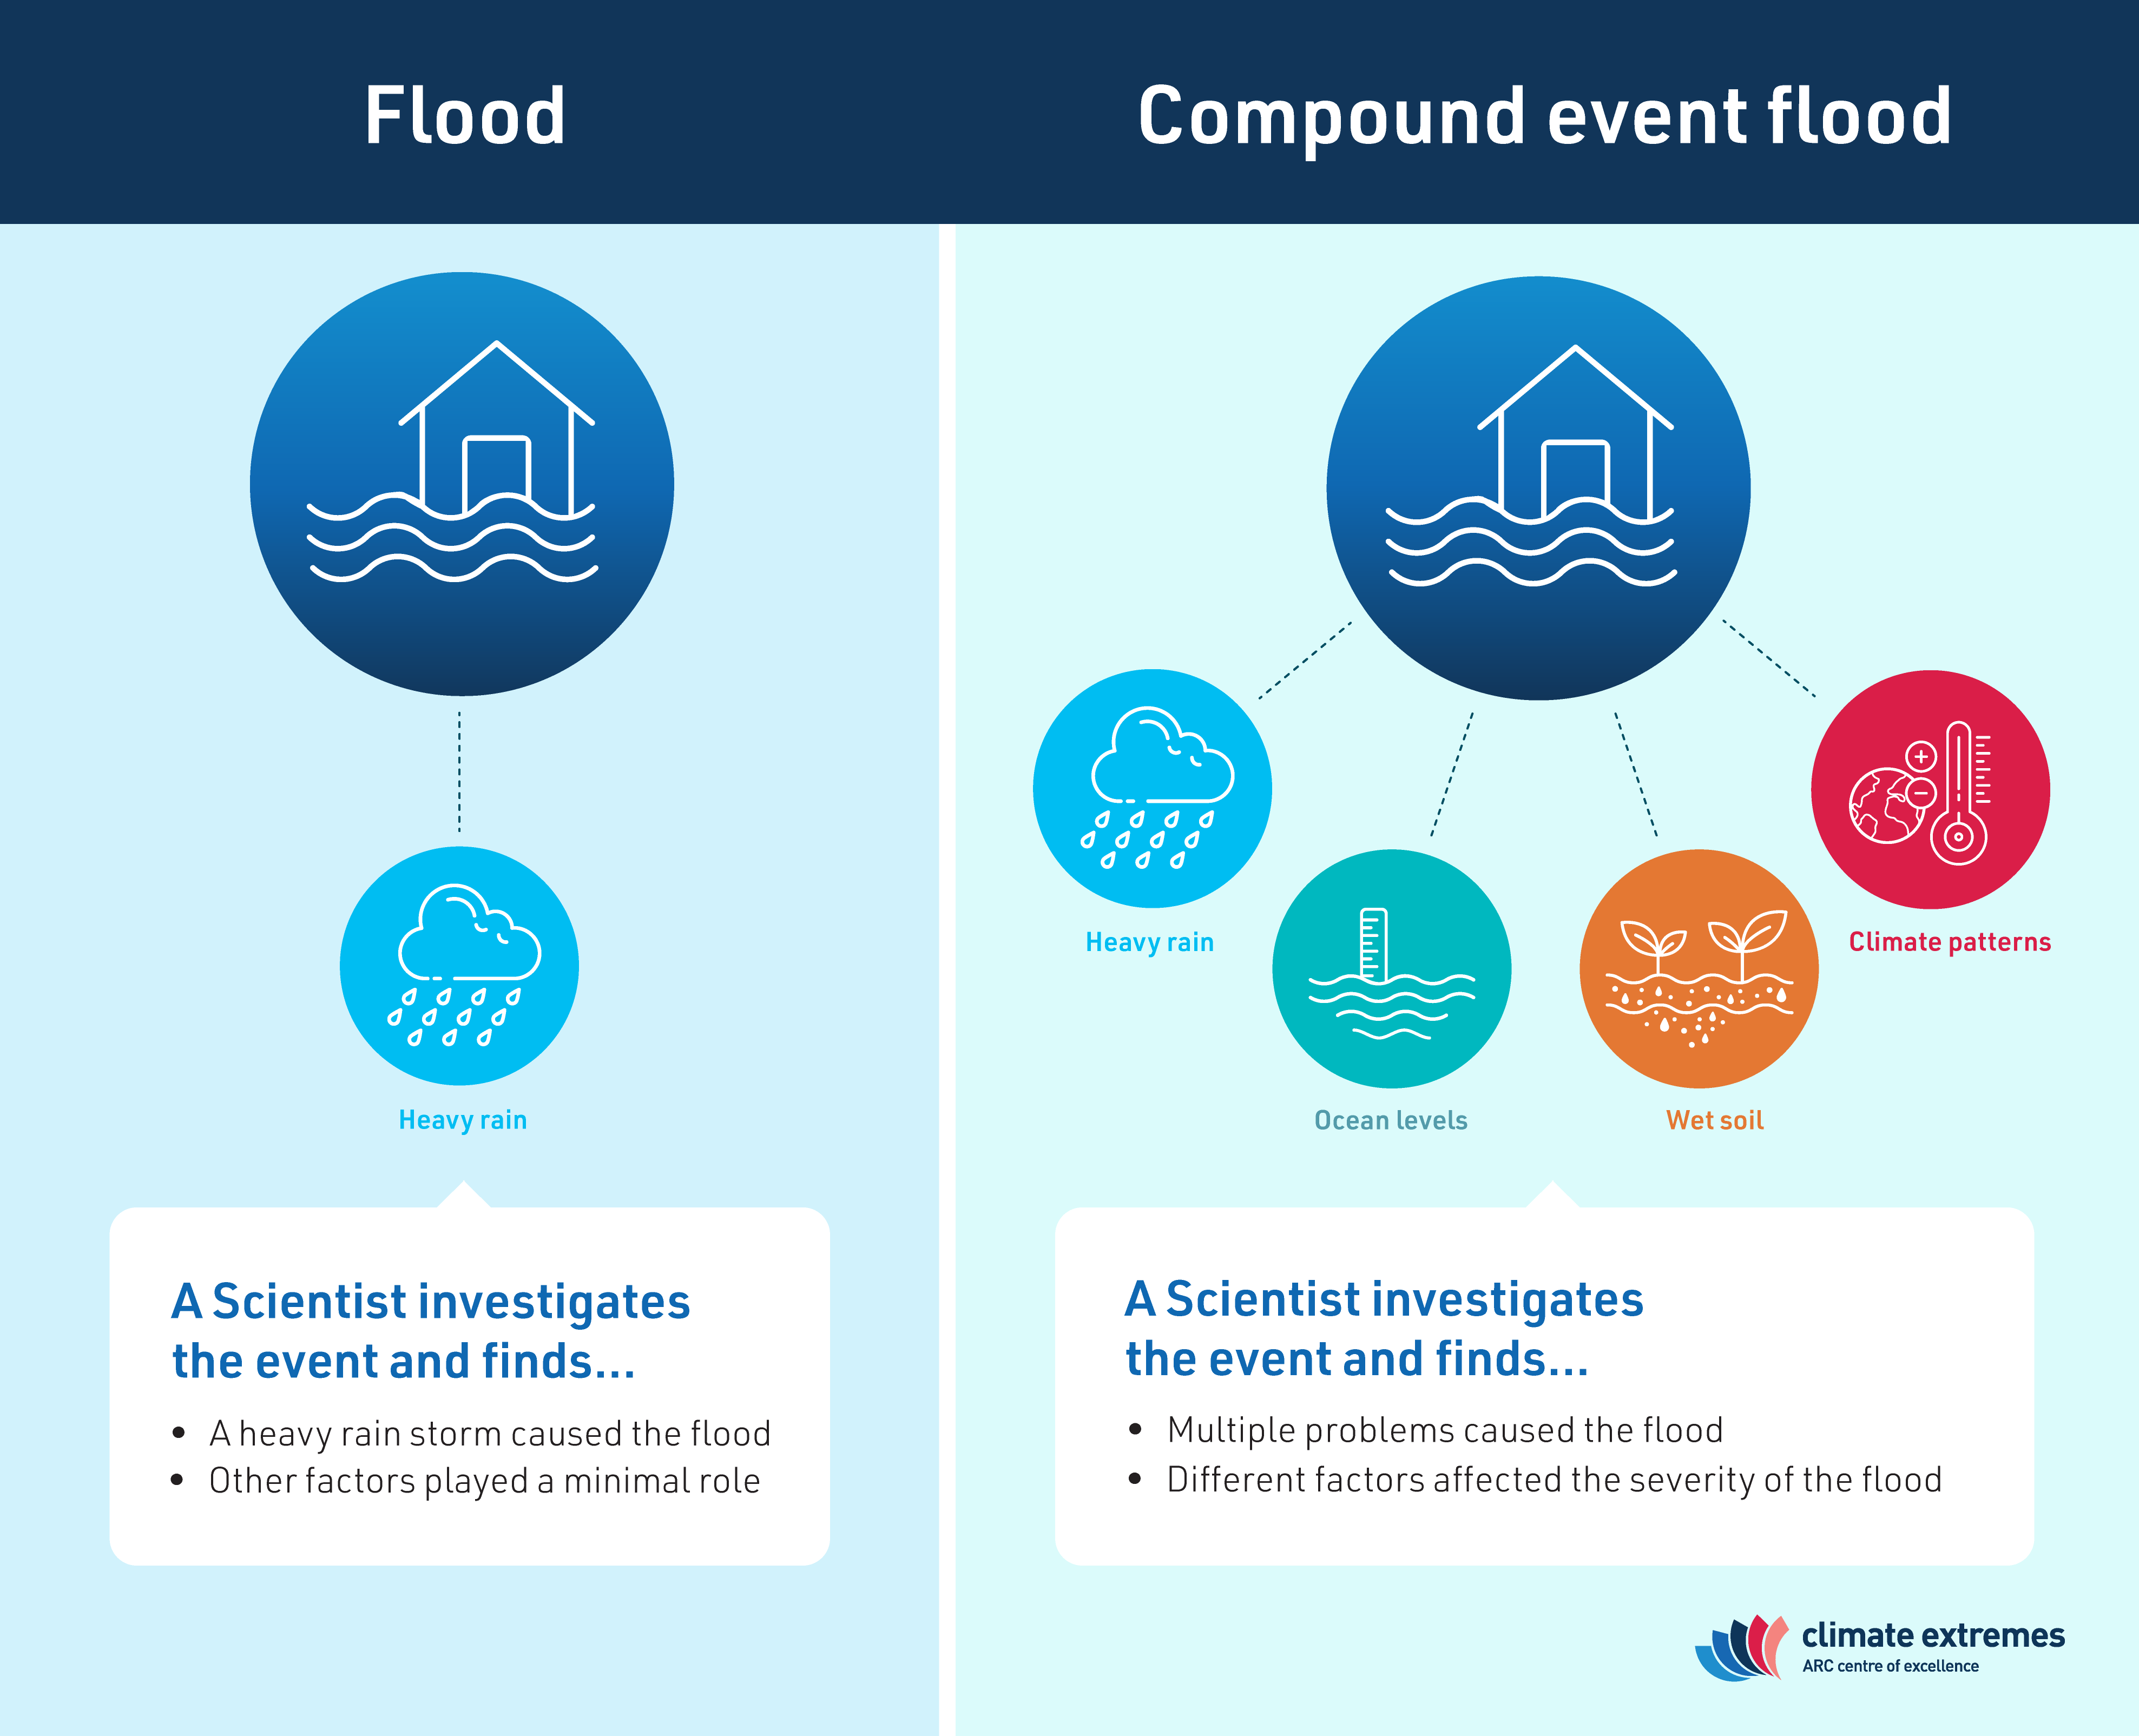 Flood: A scientist investigates the event and finds that a heavy rain storm caused the flood and other factors played a minimal role.

Compound event flood: A scientist investigates the event and finds multiple problems caused the flood and different factors affected the severity of the flood.